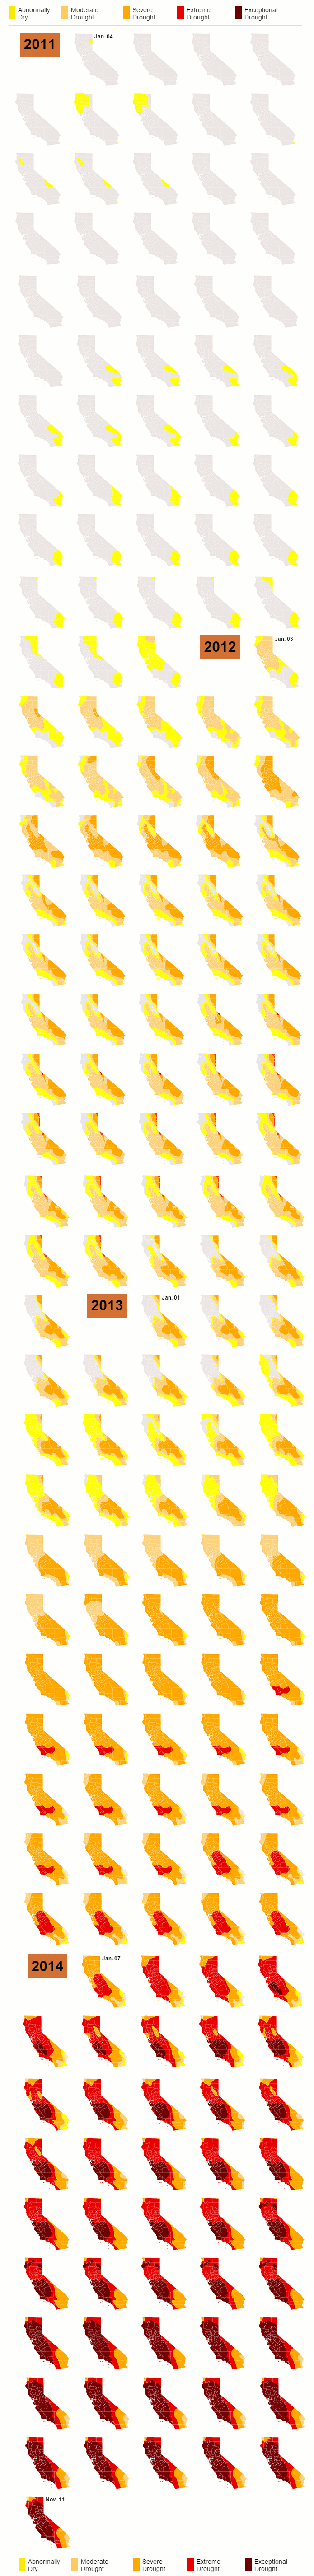 202 Drought Maps of California Show How Dry It Is